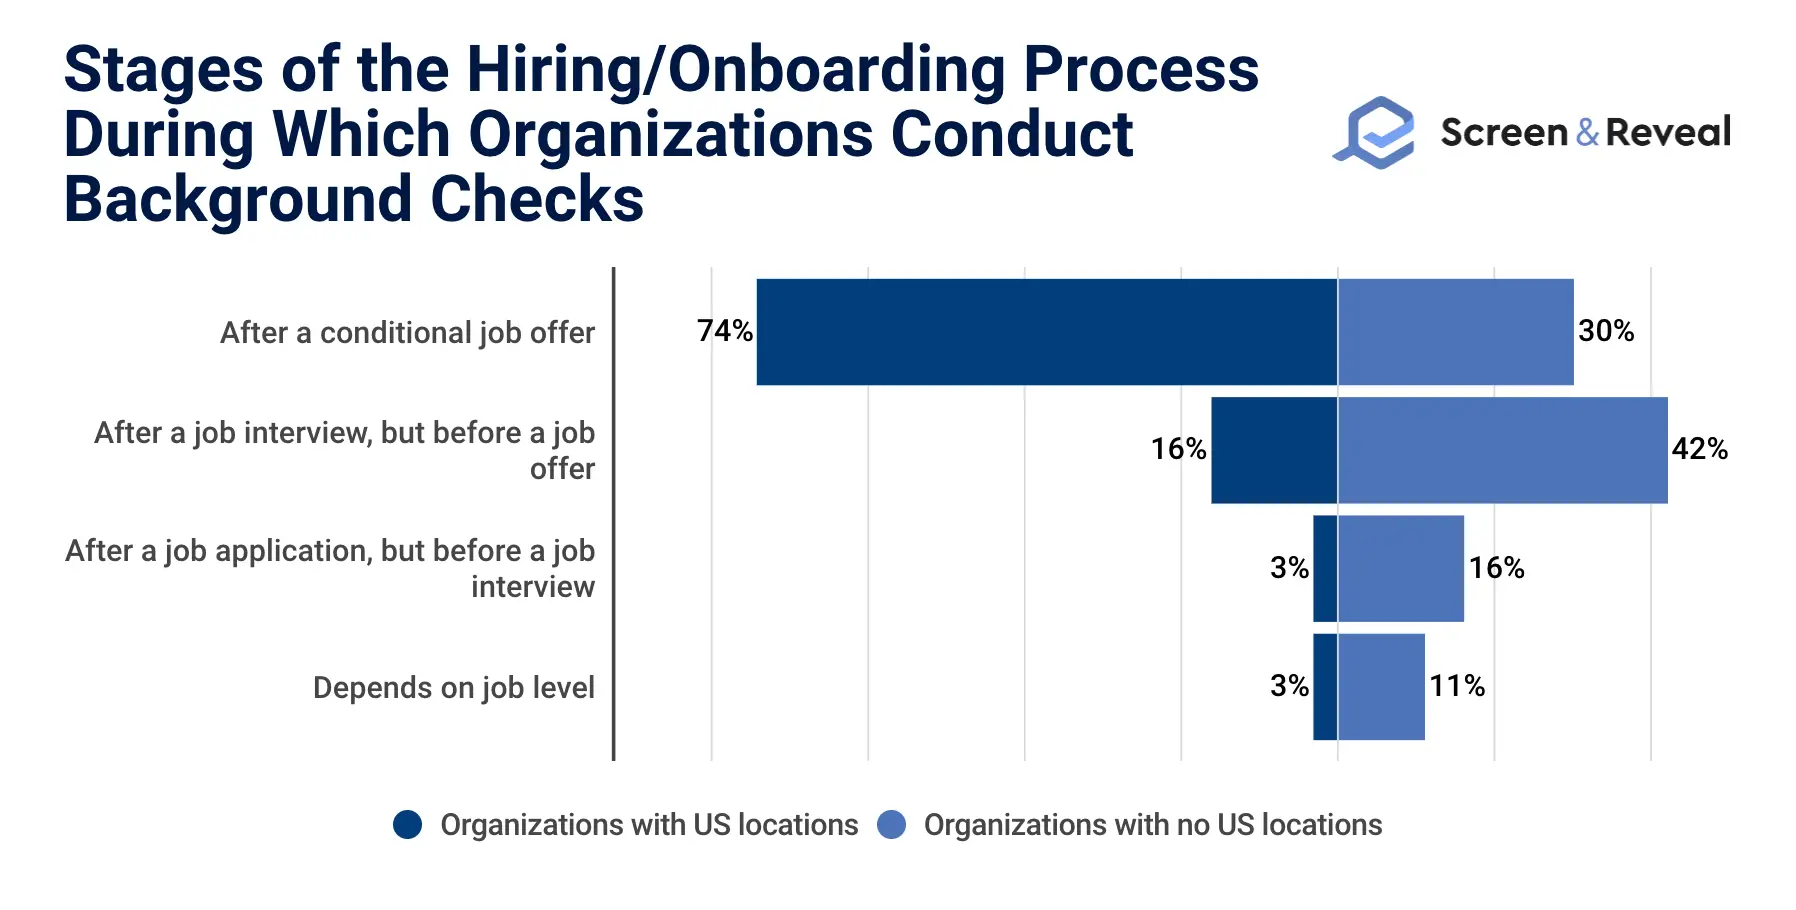 Stages of the Hiring/Onboarding Process During Which Organizations Conduct Background Checks